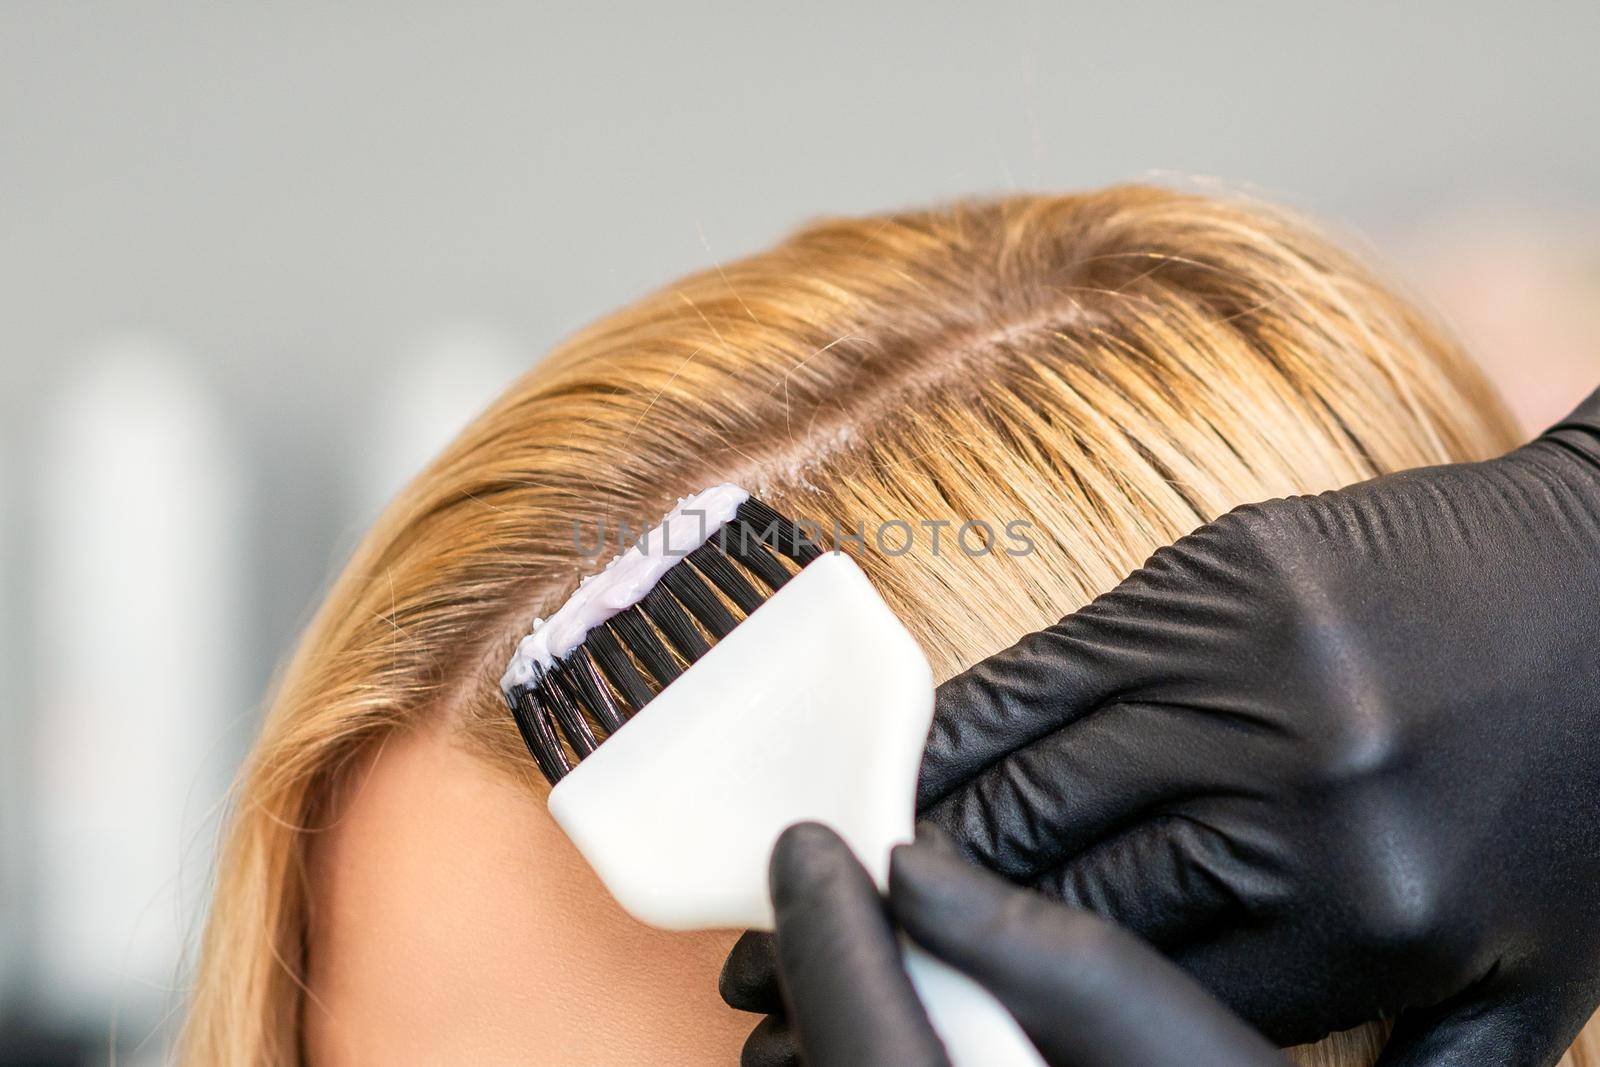 Hands of hairdresser dyeing hair of woman with brush at beauty salon.